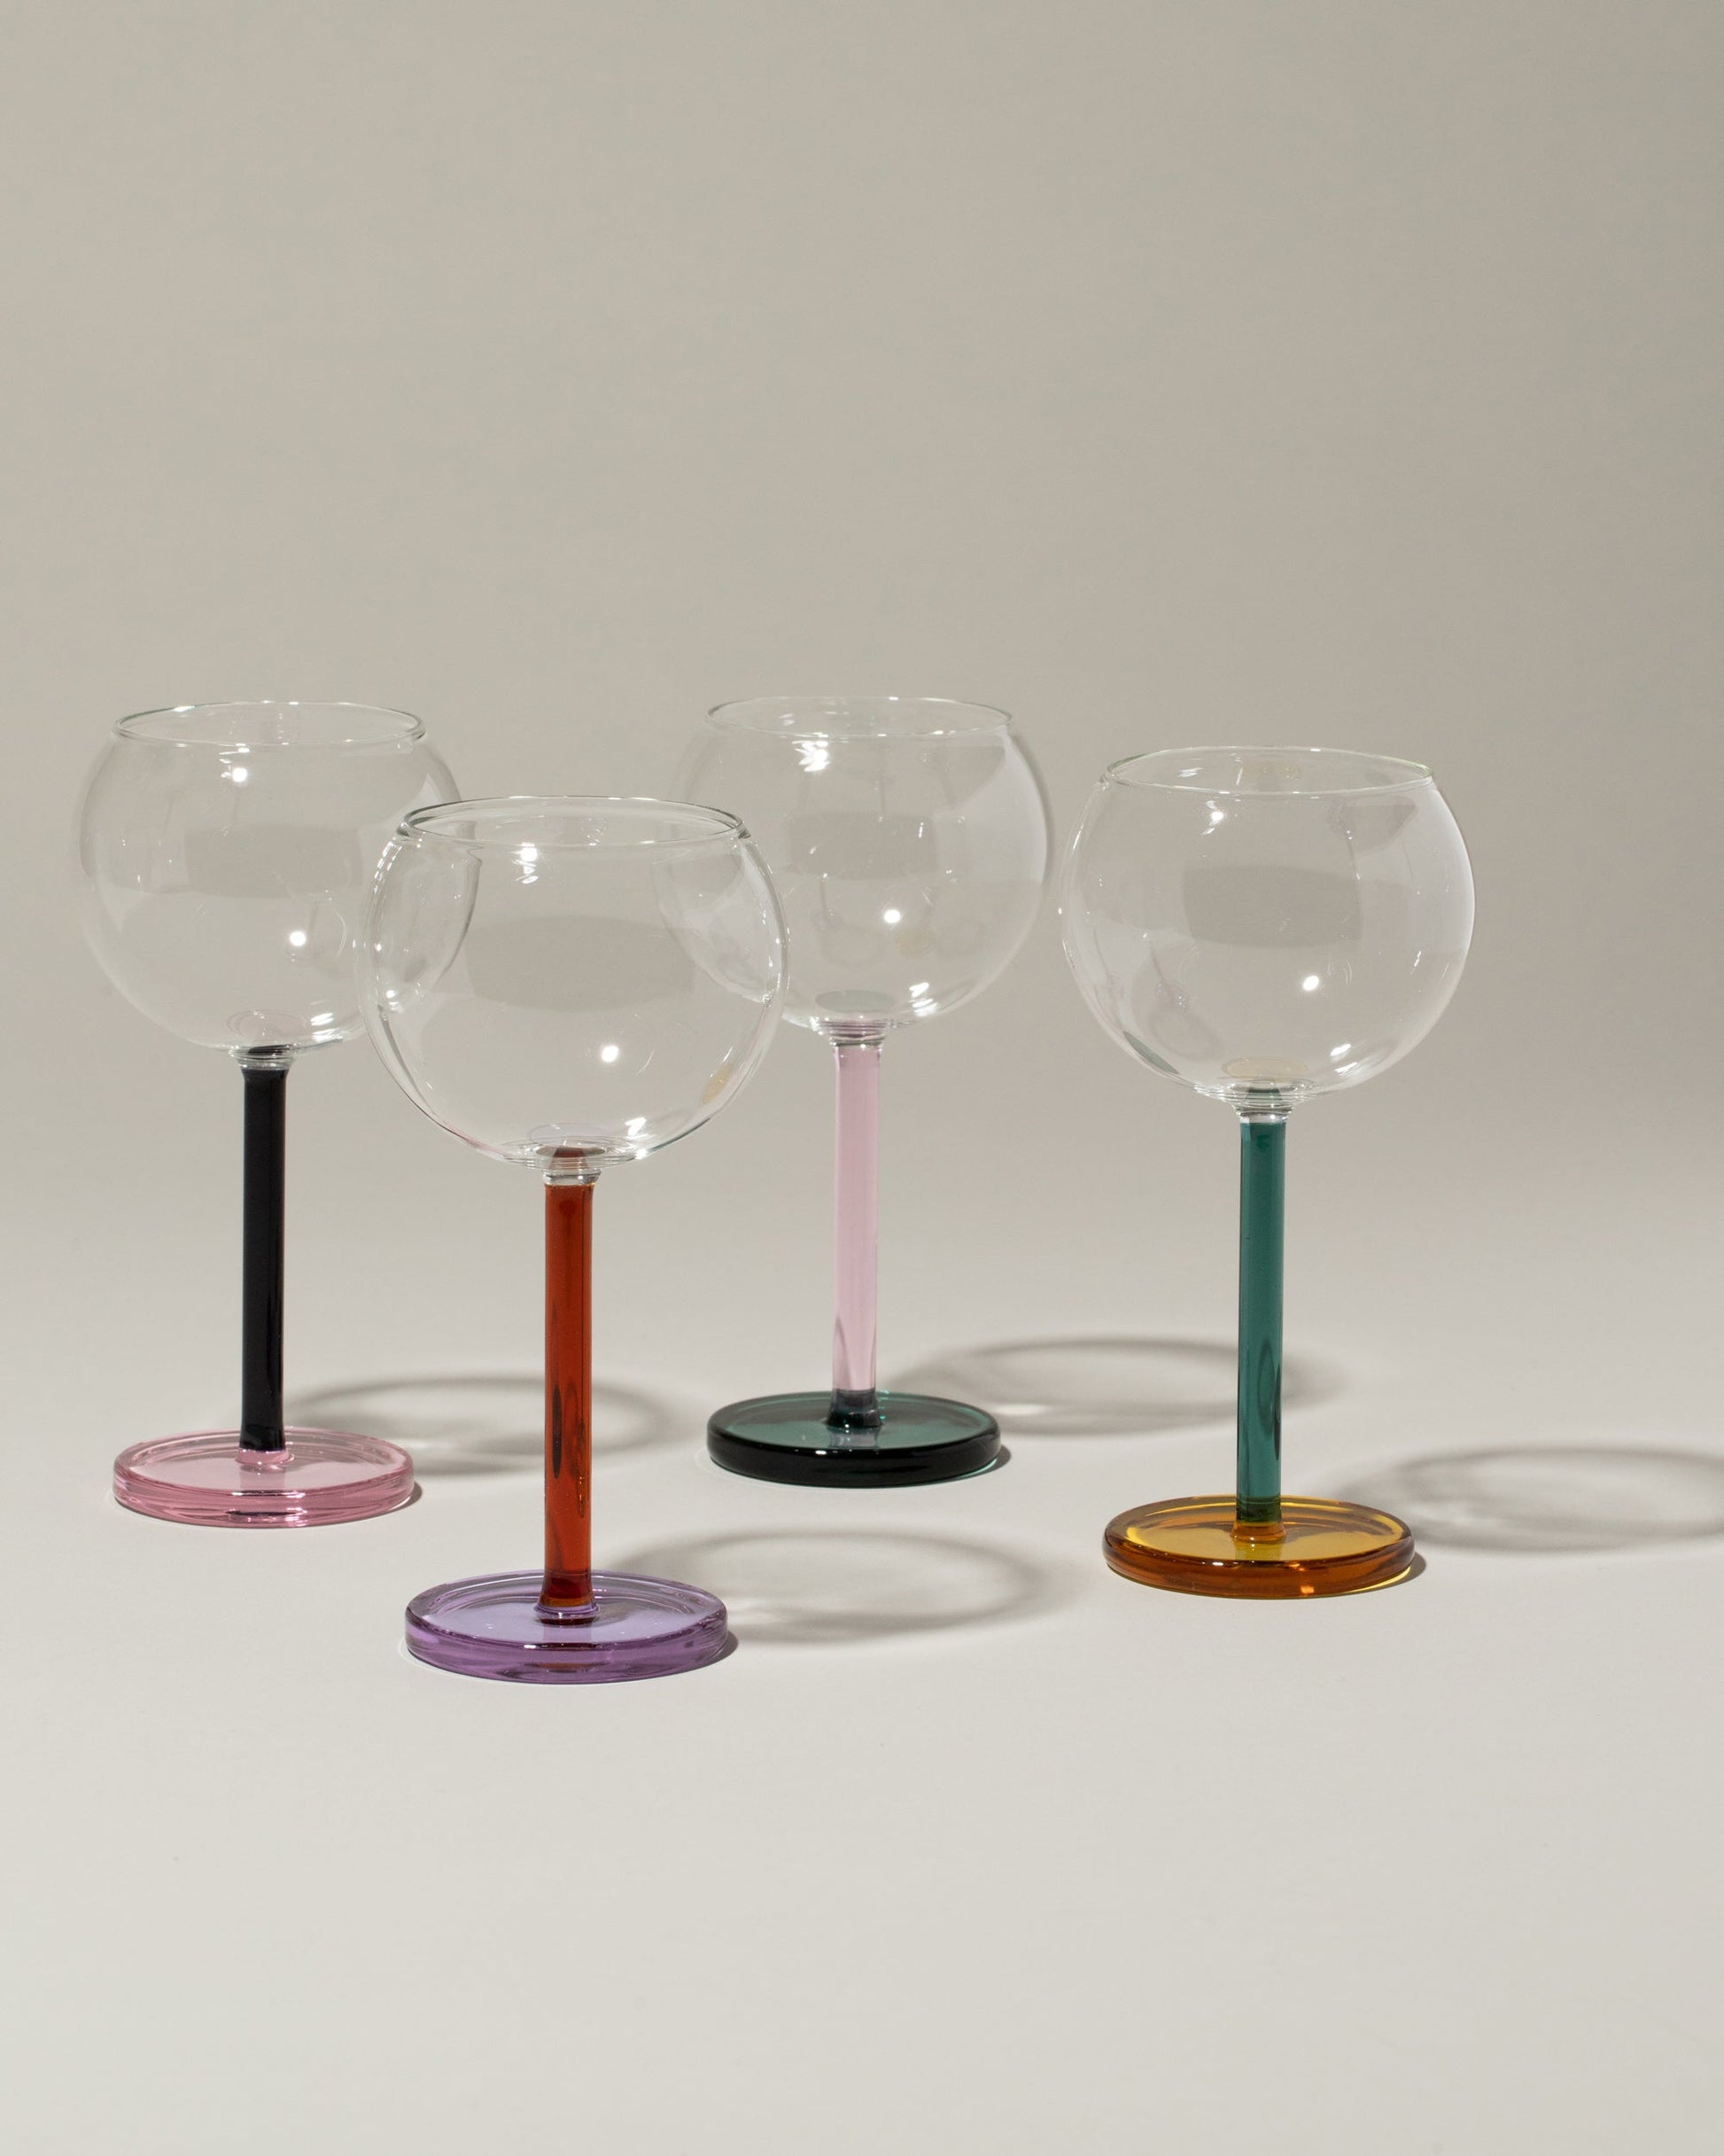 Group of Sophie Lou Jacobsen Evergreen & Honey, Pink & Evergreen, Midnight Blue & Pink and Amber & Lilac Bilboquet Wine Glasses on light color background.